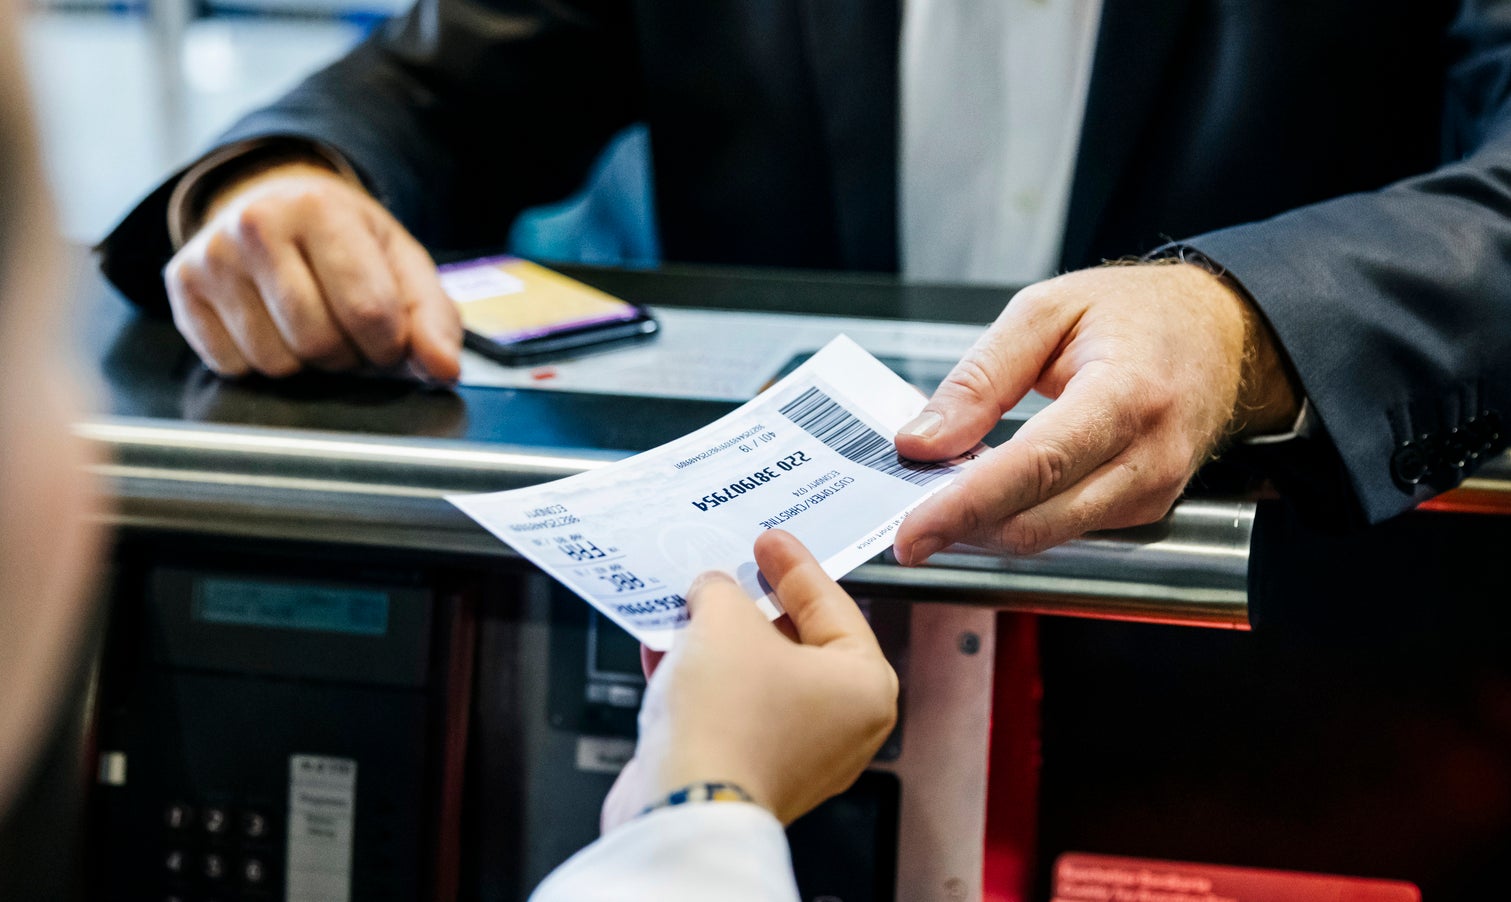 Person at airport check-in counter handing over a boarding pass to an airline representative